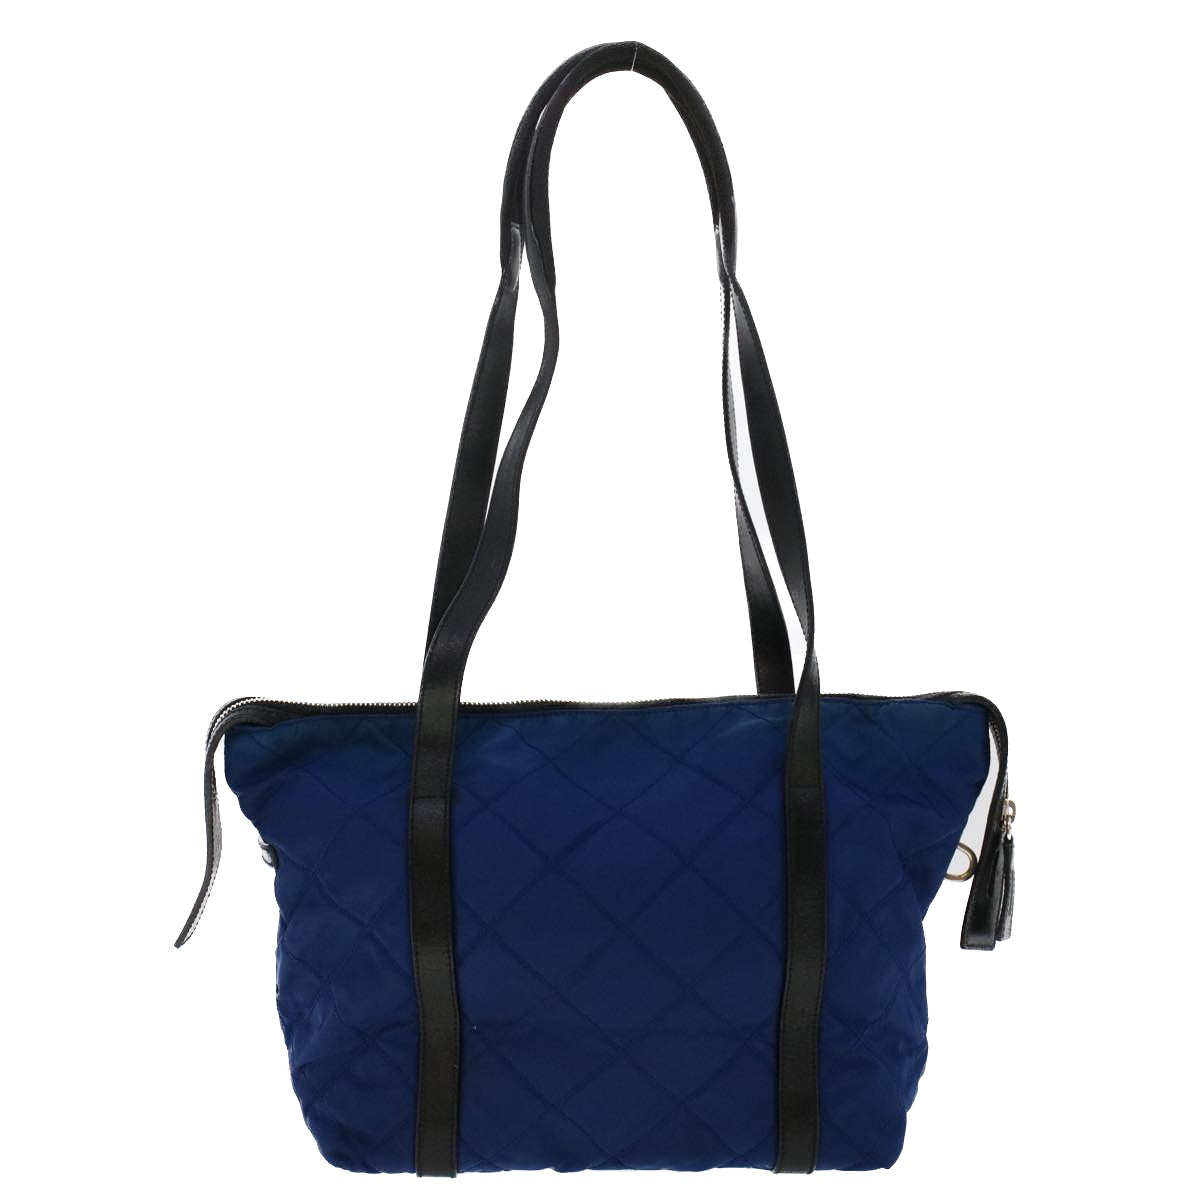 PRADA Quilted Shoulder Bag Nylon Leather Navy Auth 47100